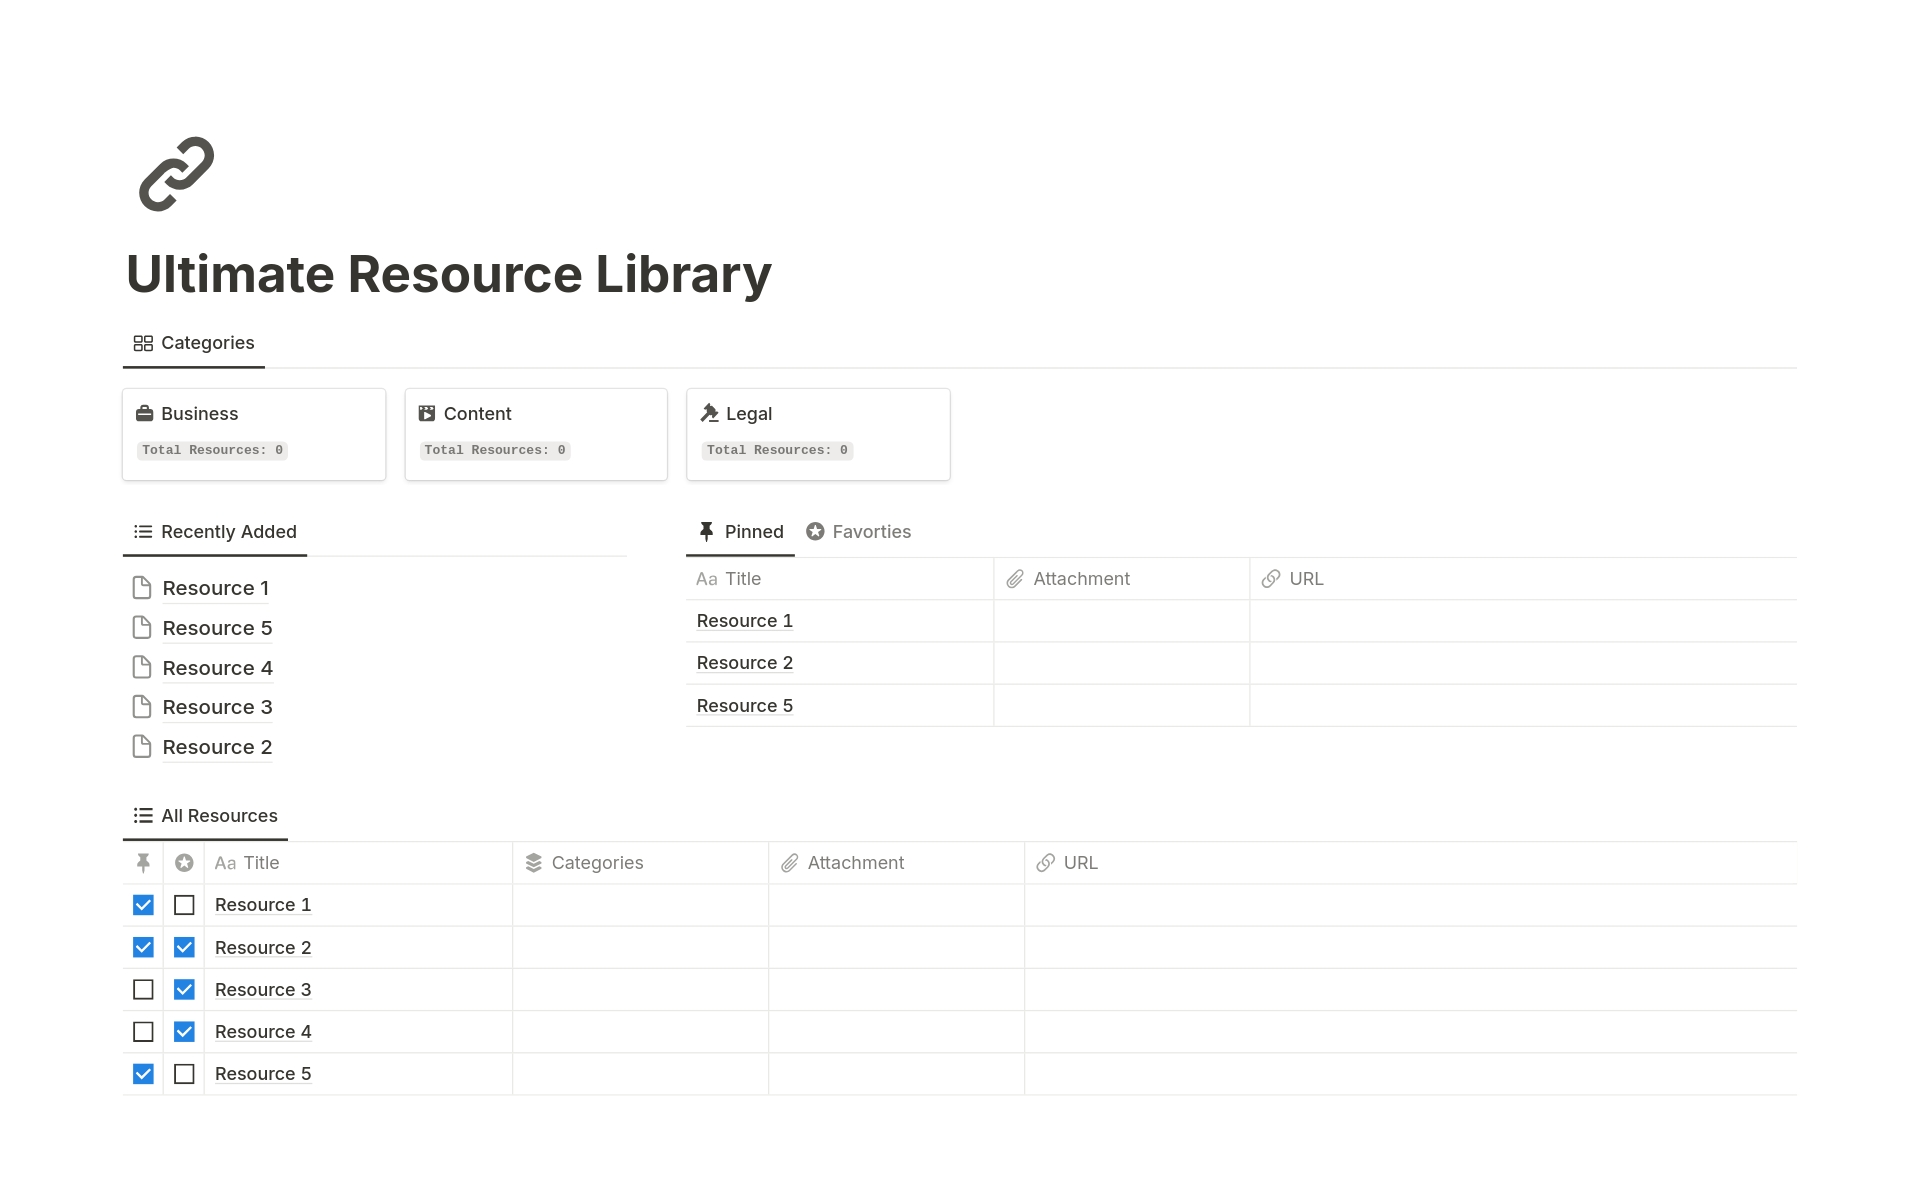 Streamline your online research and resource management with our Notion template. Save web content, articles, links, and resources effortlessly in one organized space. Stay focused and productive by easily accessing and categorizing your saved content.